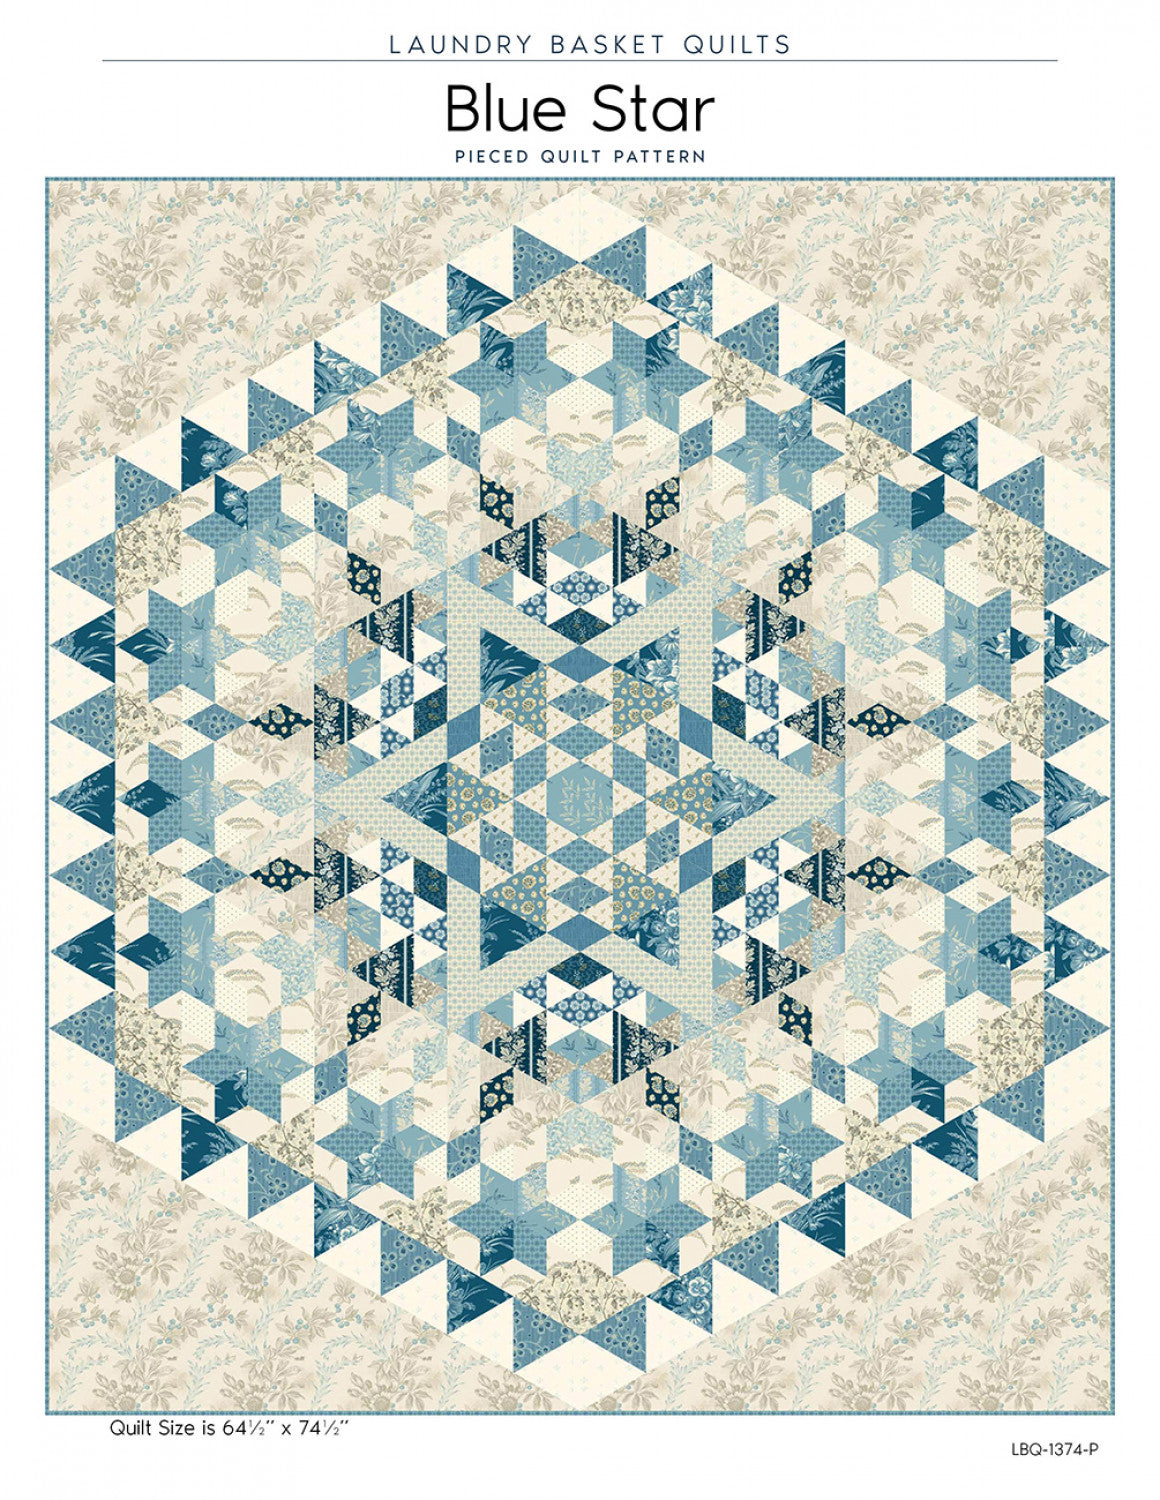 Blue Star Quilt Pattern by Laundry Basket